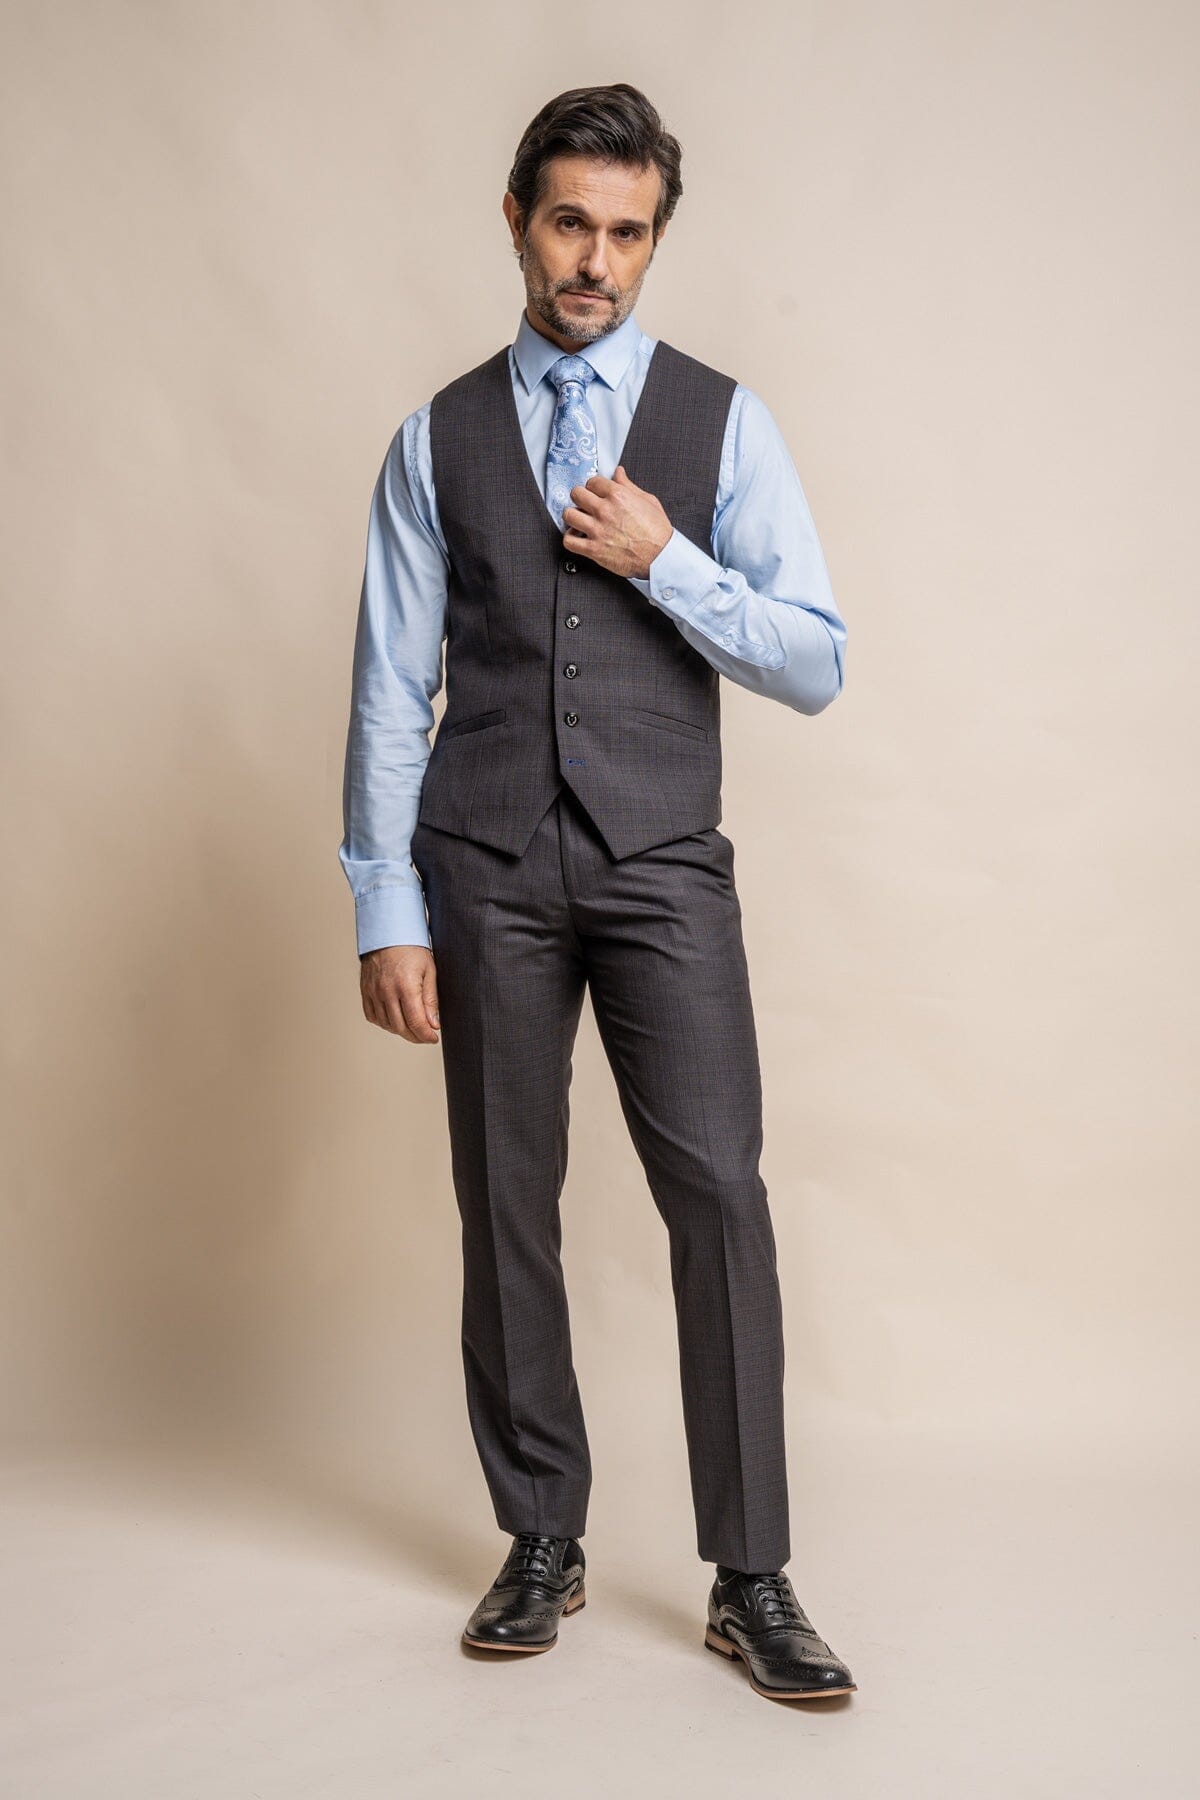 Graphite Check Trousers - STOCK CLEARANCE - Trousers Sale - 